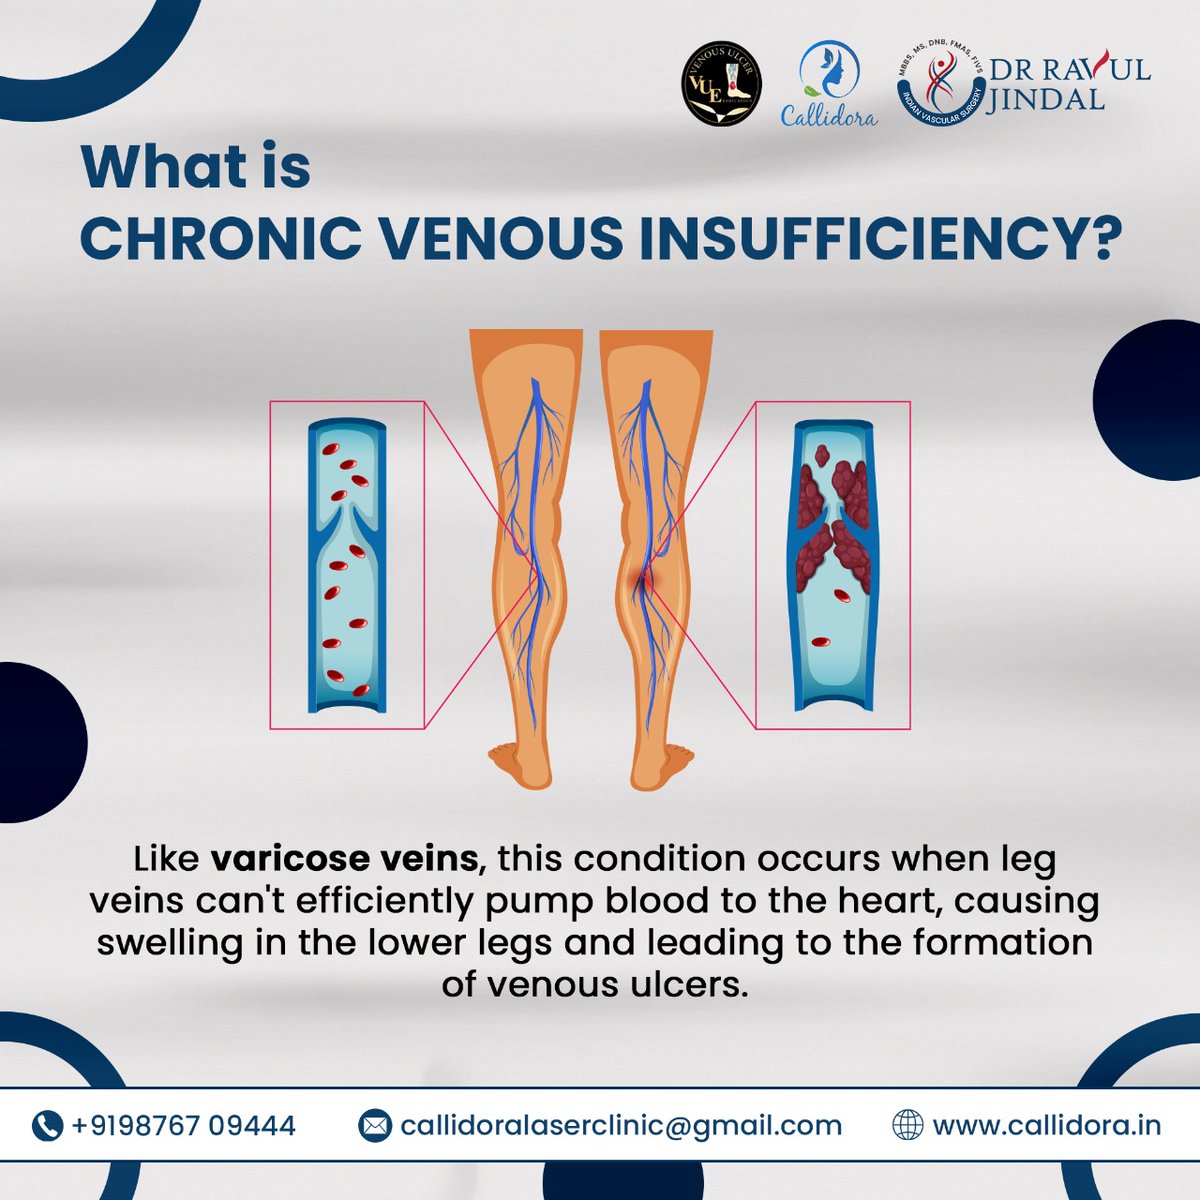 Treatment for this condition typically involves lifestyle changes, compression therapy, and, in severe cases, medical procedures. 

Book an appointment at 9876709444 for consultation.

#drravuljindal
#venousdisease
#venousulcer #venousulcereradication